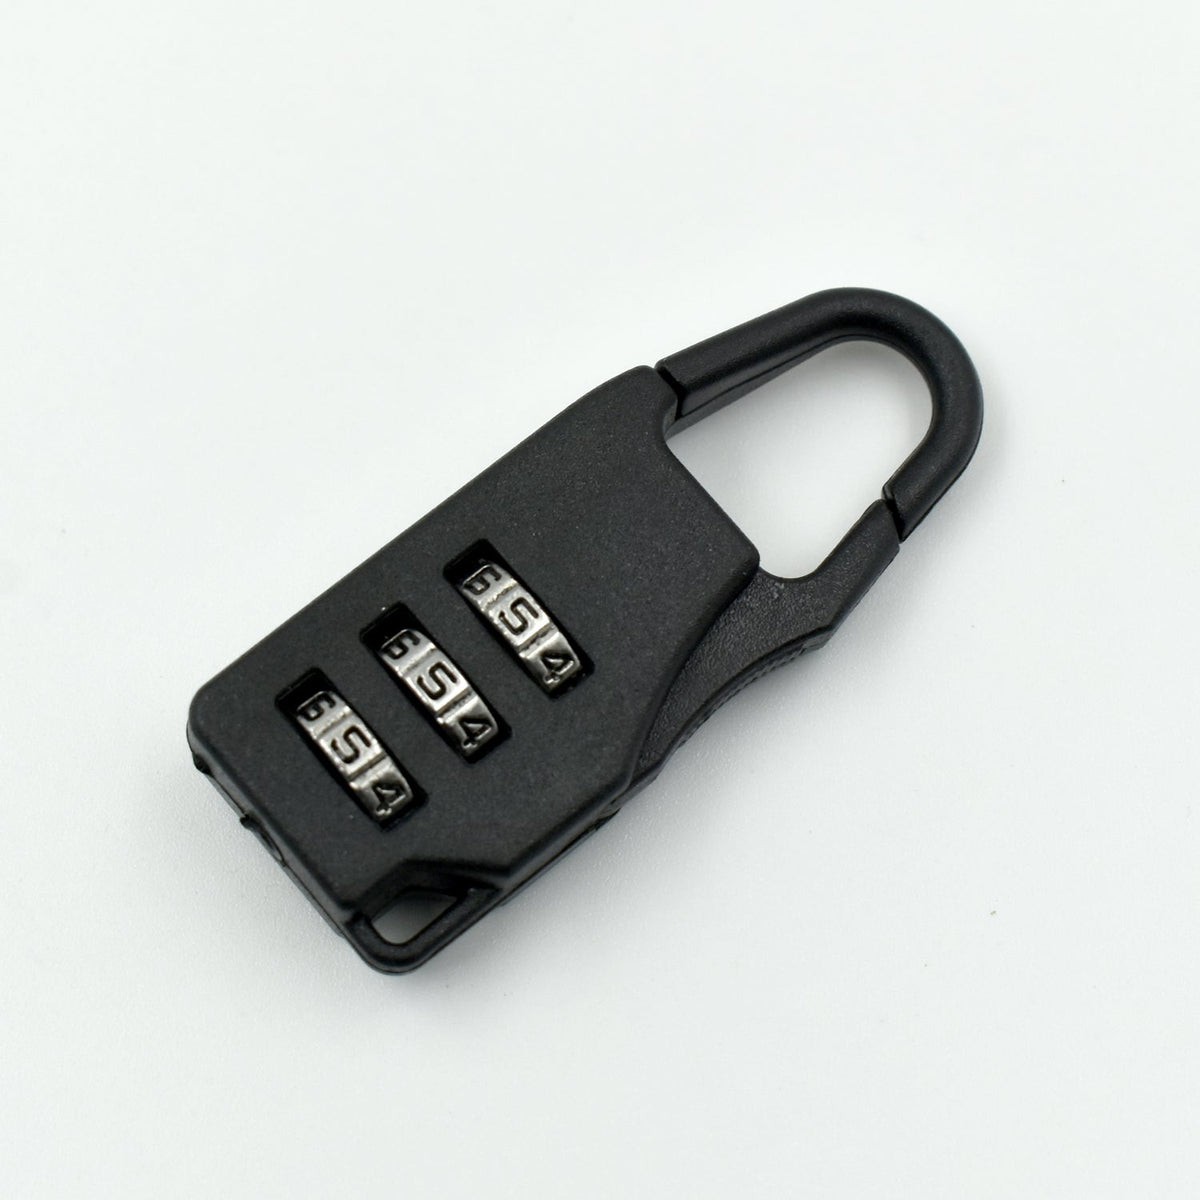 6109 3 Digit luggage Lock and tool used widely in all security purposes of luggage items and materials. DeoDap